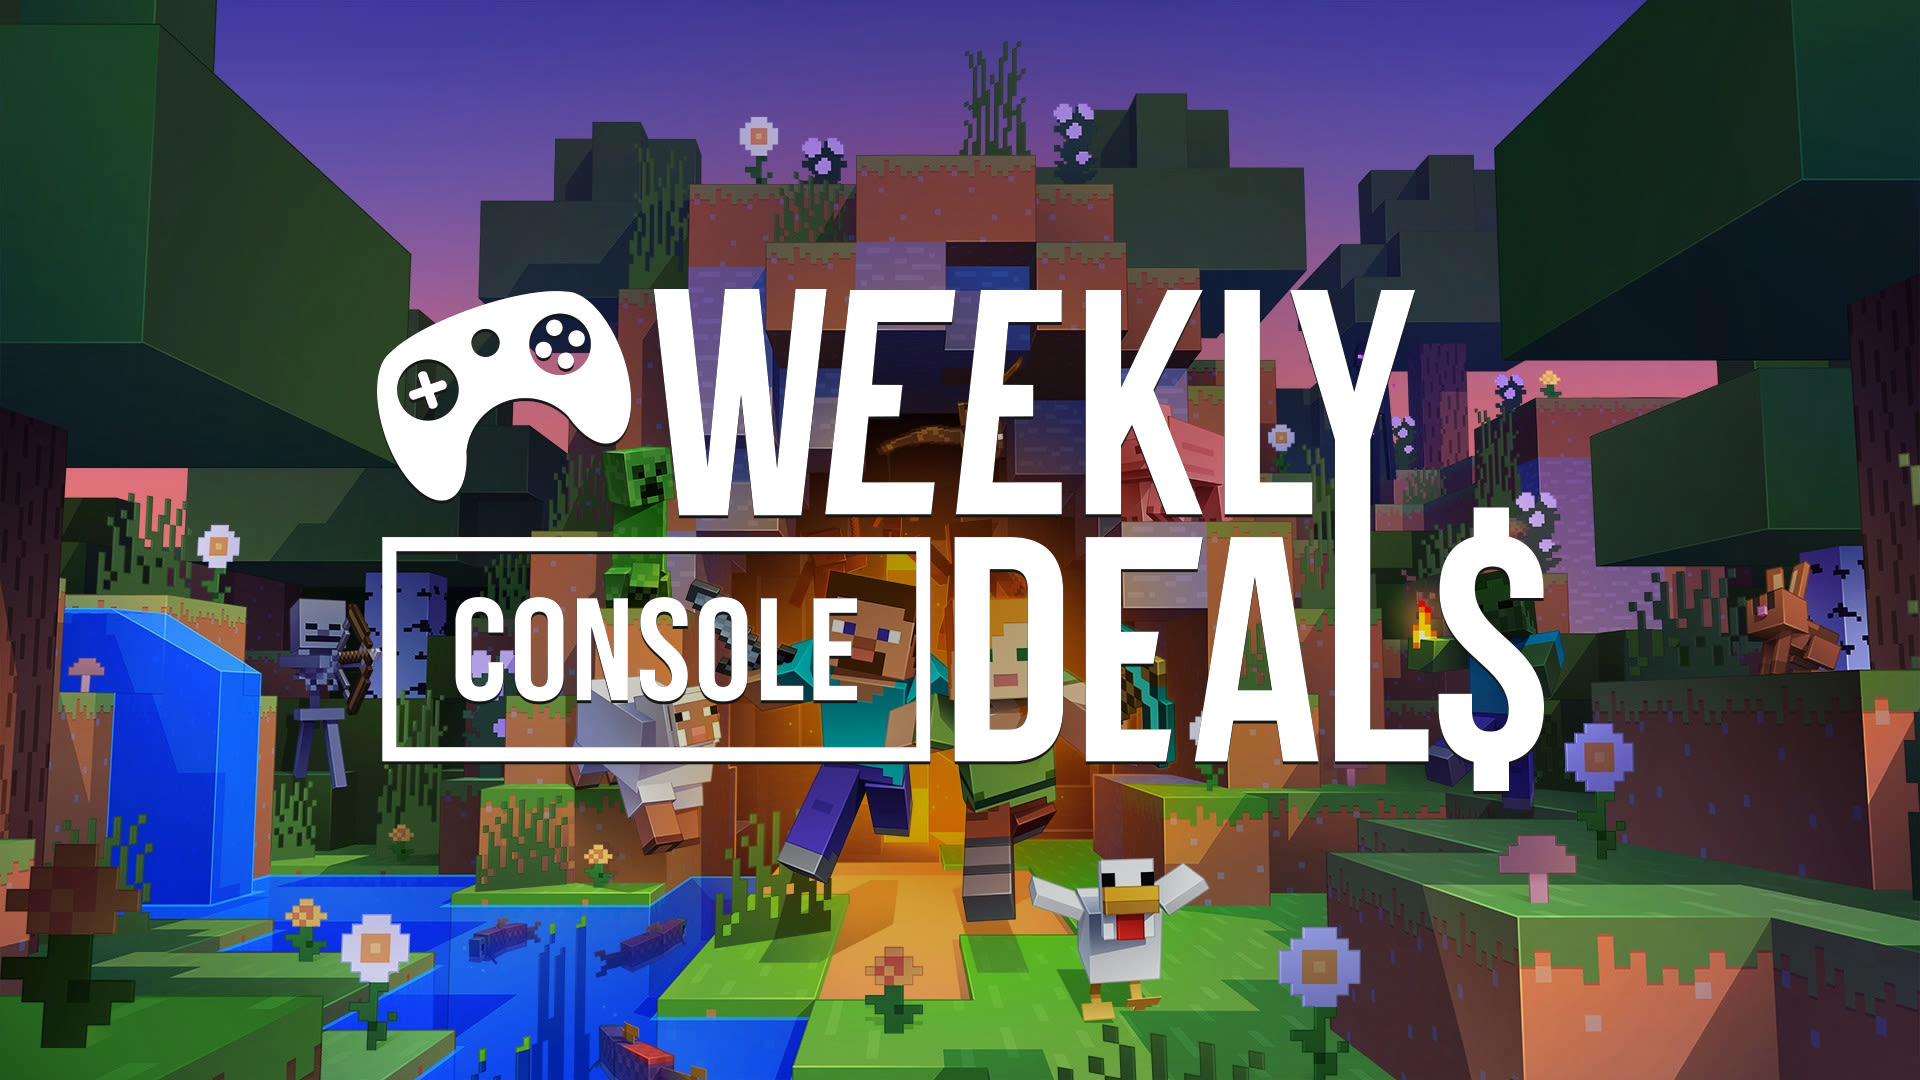 Weekend Console Download Deals for May 17: Minecraft celebrates 15 years